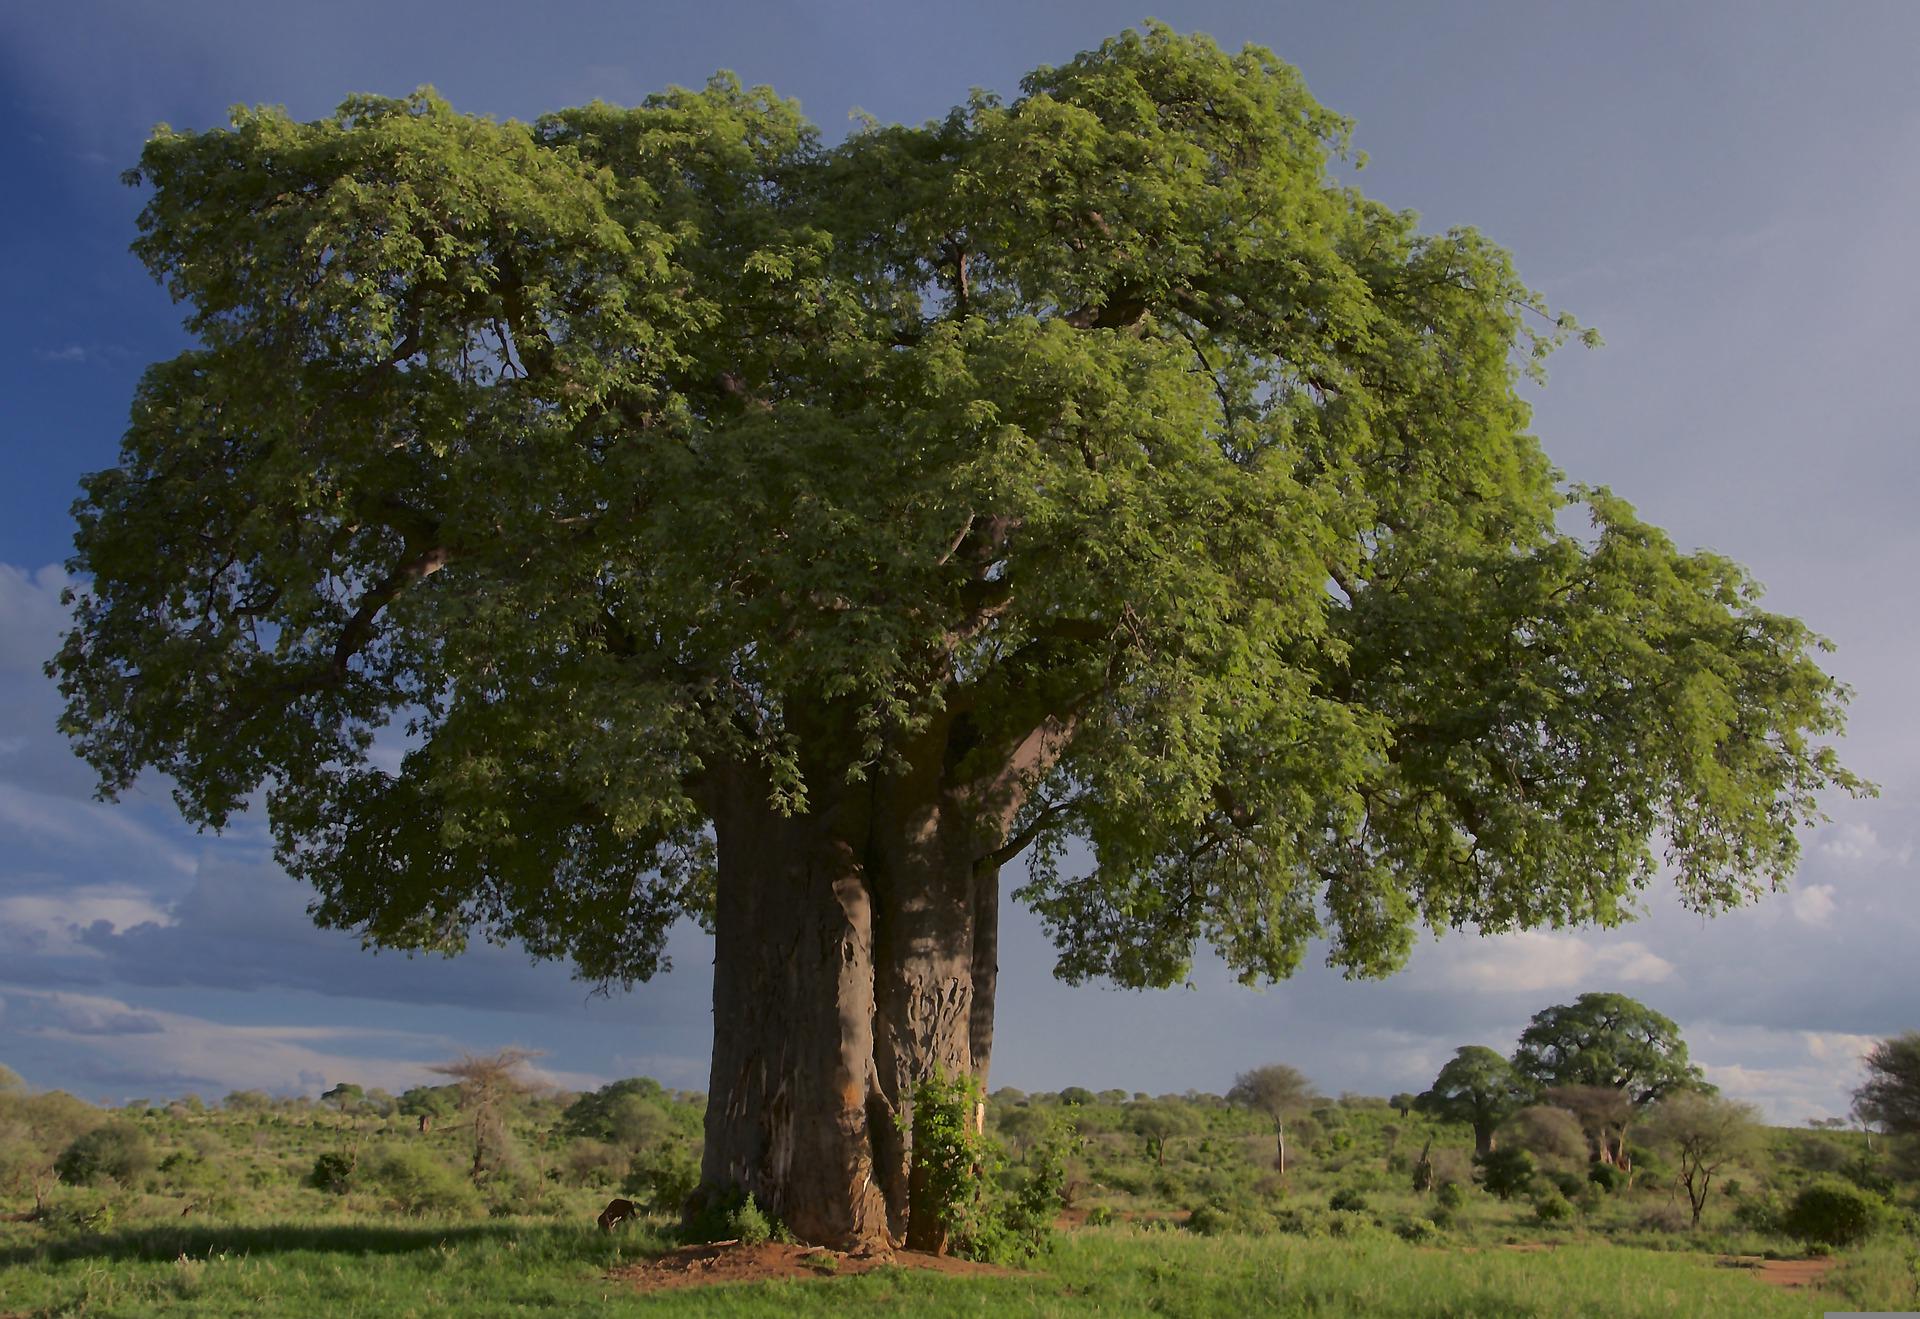 Image of a large tree